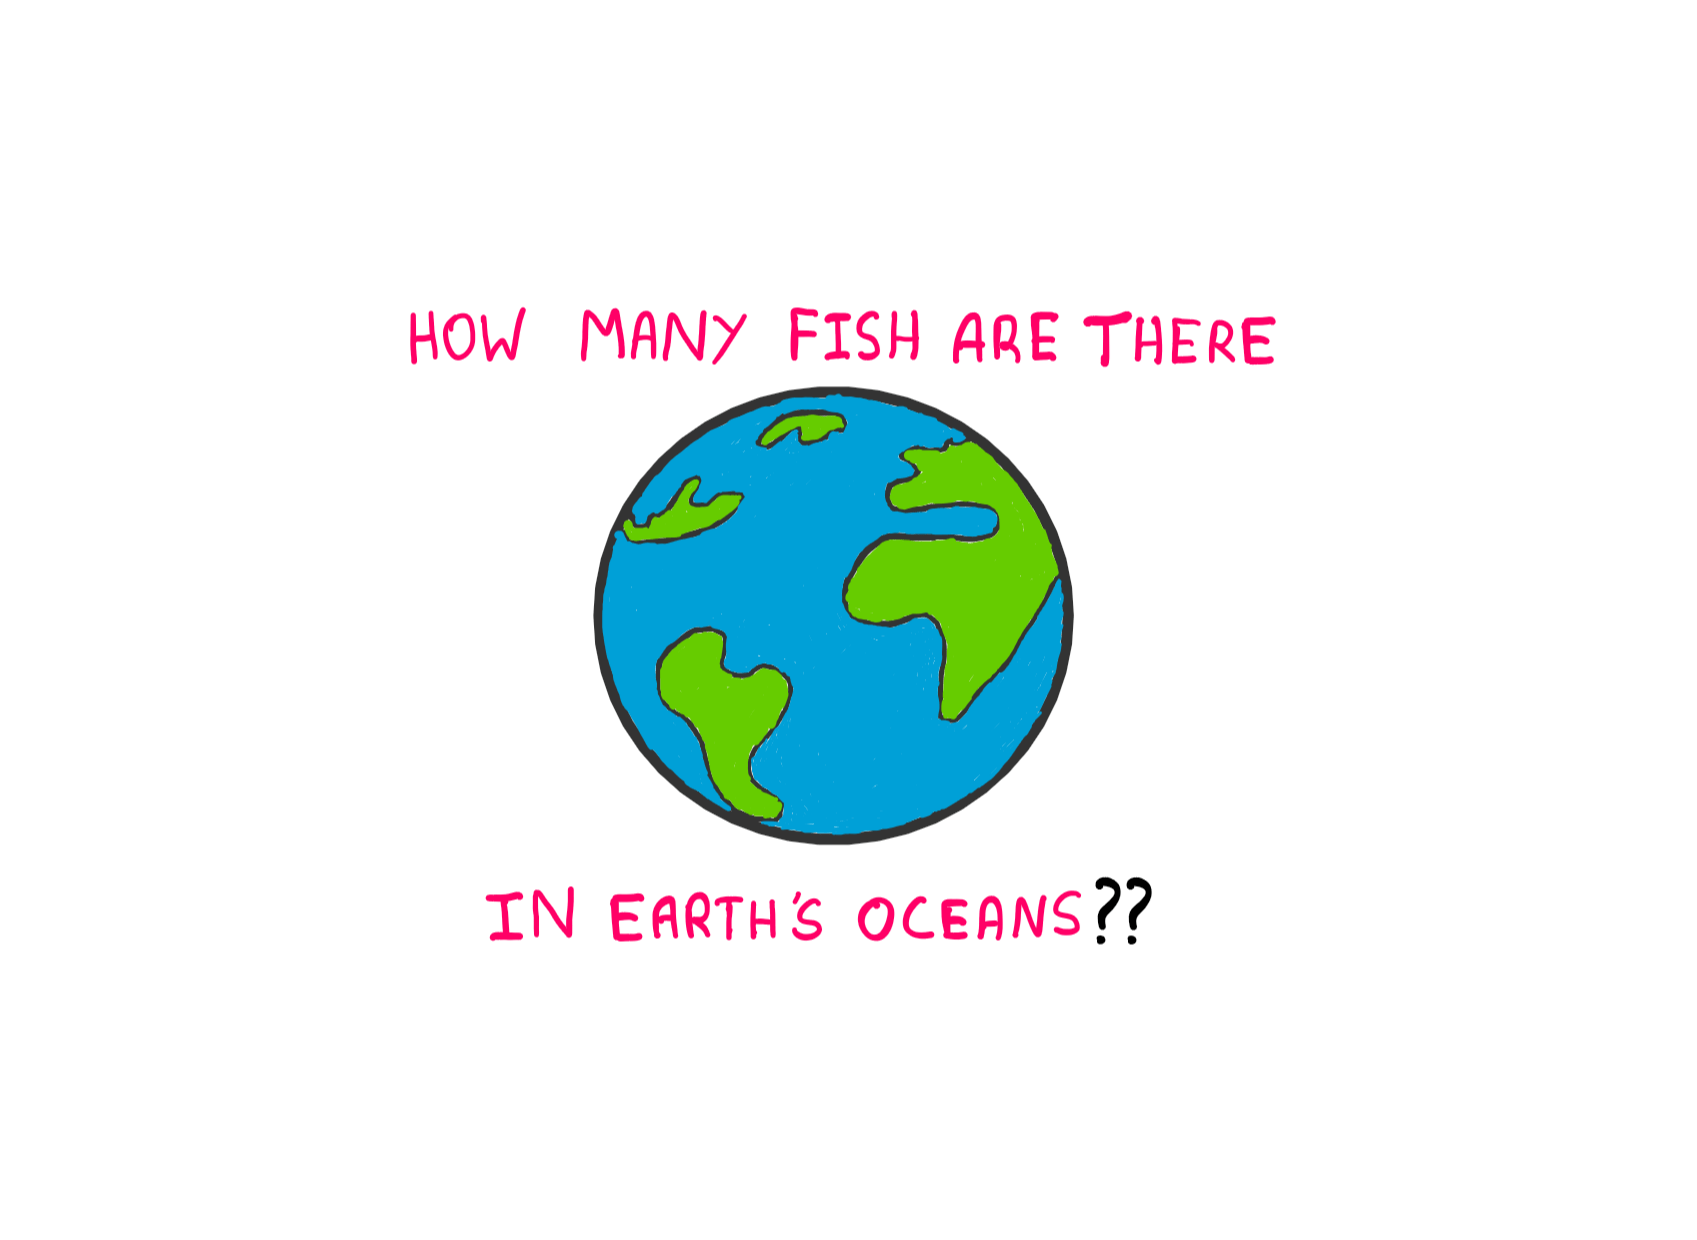 Fermi Problems: How To Deal With Huge Numbers - An illustration showing a hand-drawn cartoon of Earth with smooth-looking continents and blue oceans. Around this cartoon, the following question is written: "How many fish are there in Earth's oceans??"